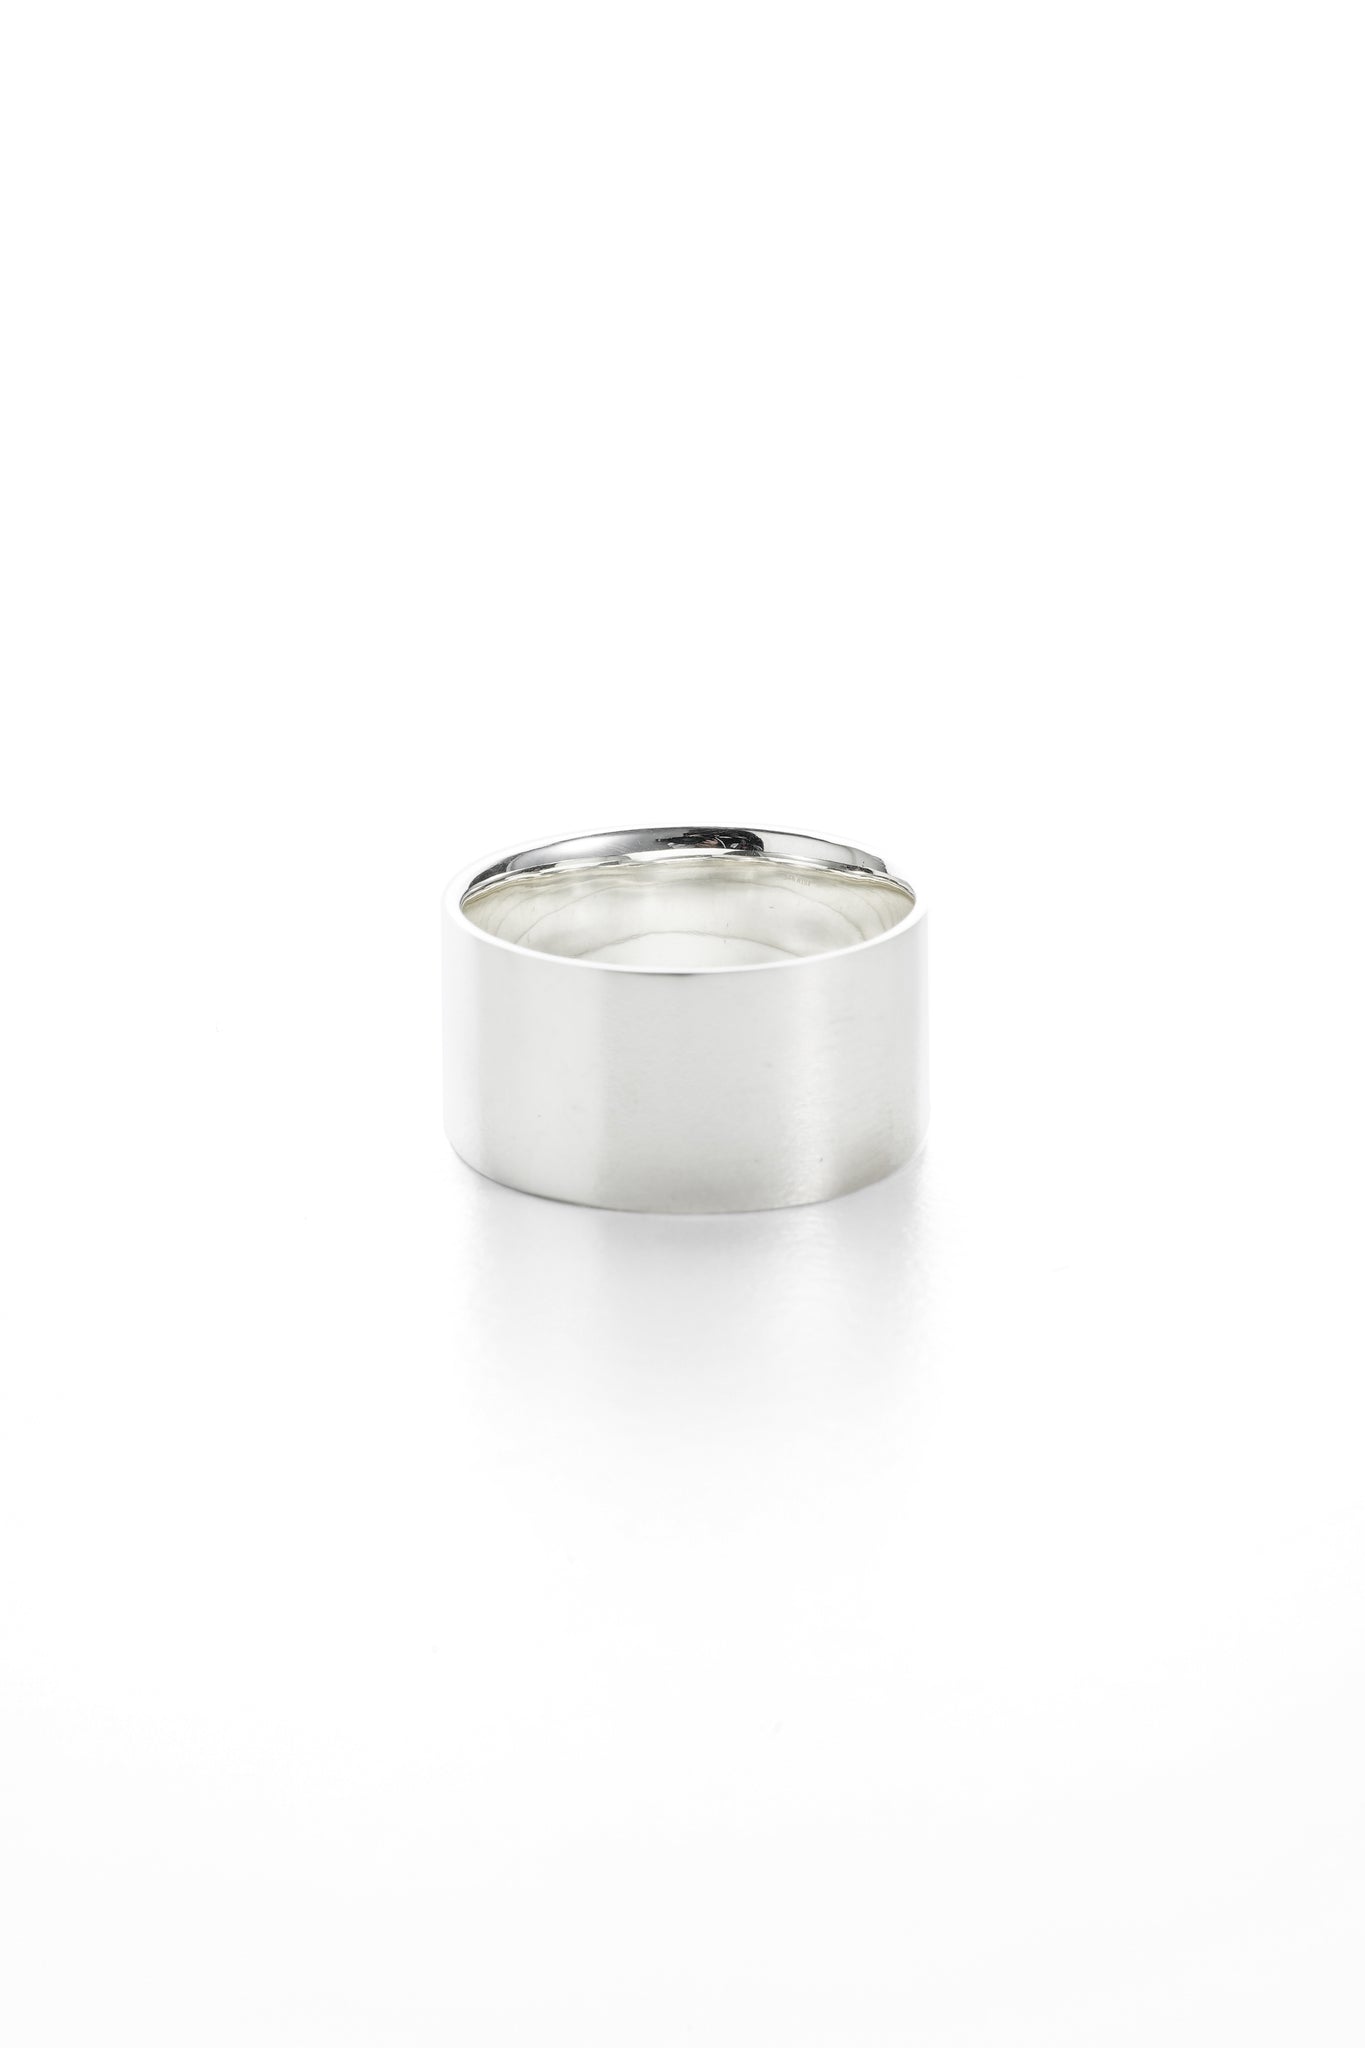 PT RING 10mm (SILVER925)